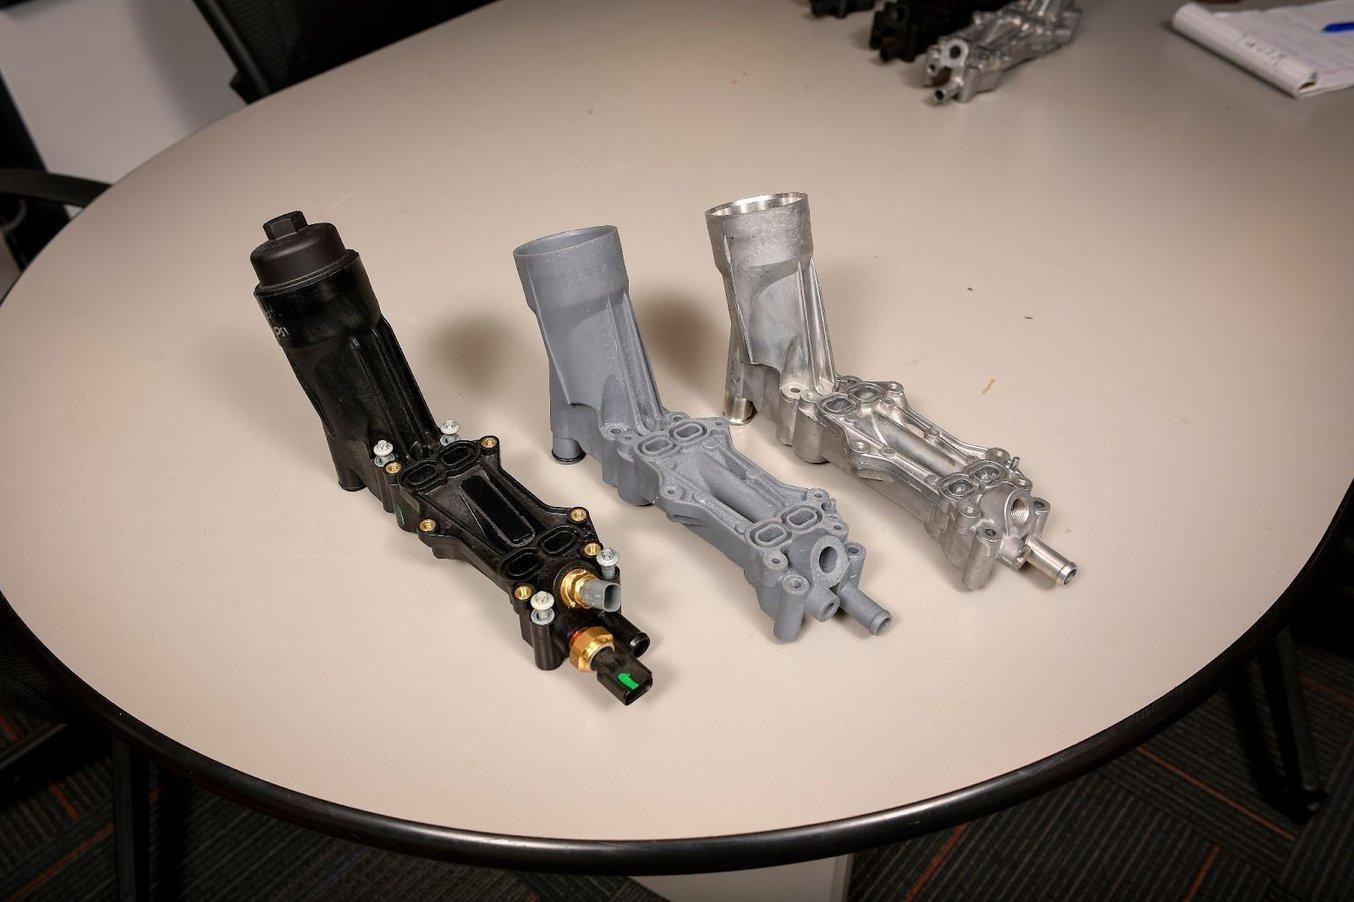 Dorman Products uses Formlabs SLA 3D printers to produce prototypes of their aftermarket products.